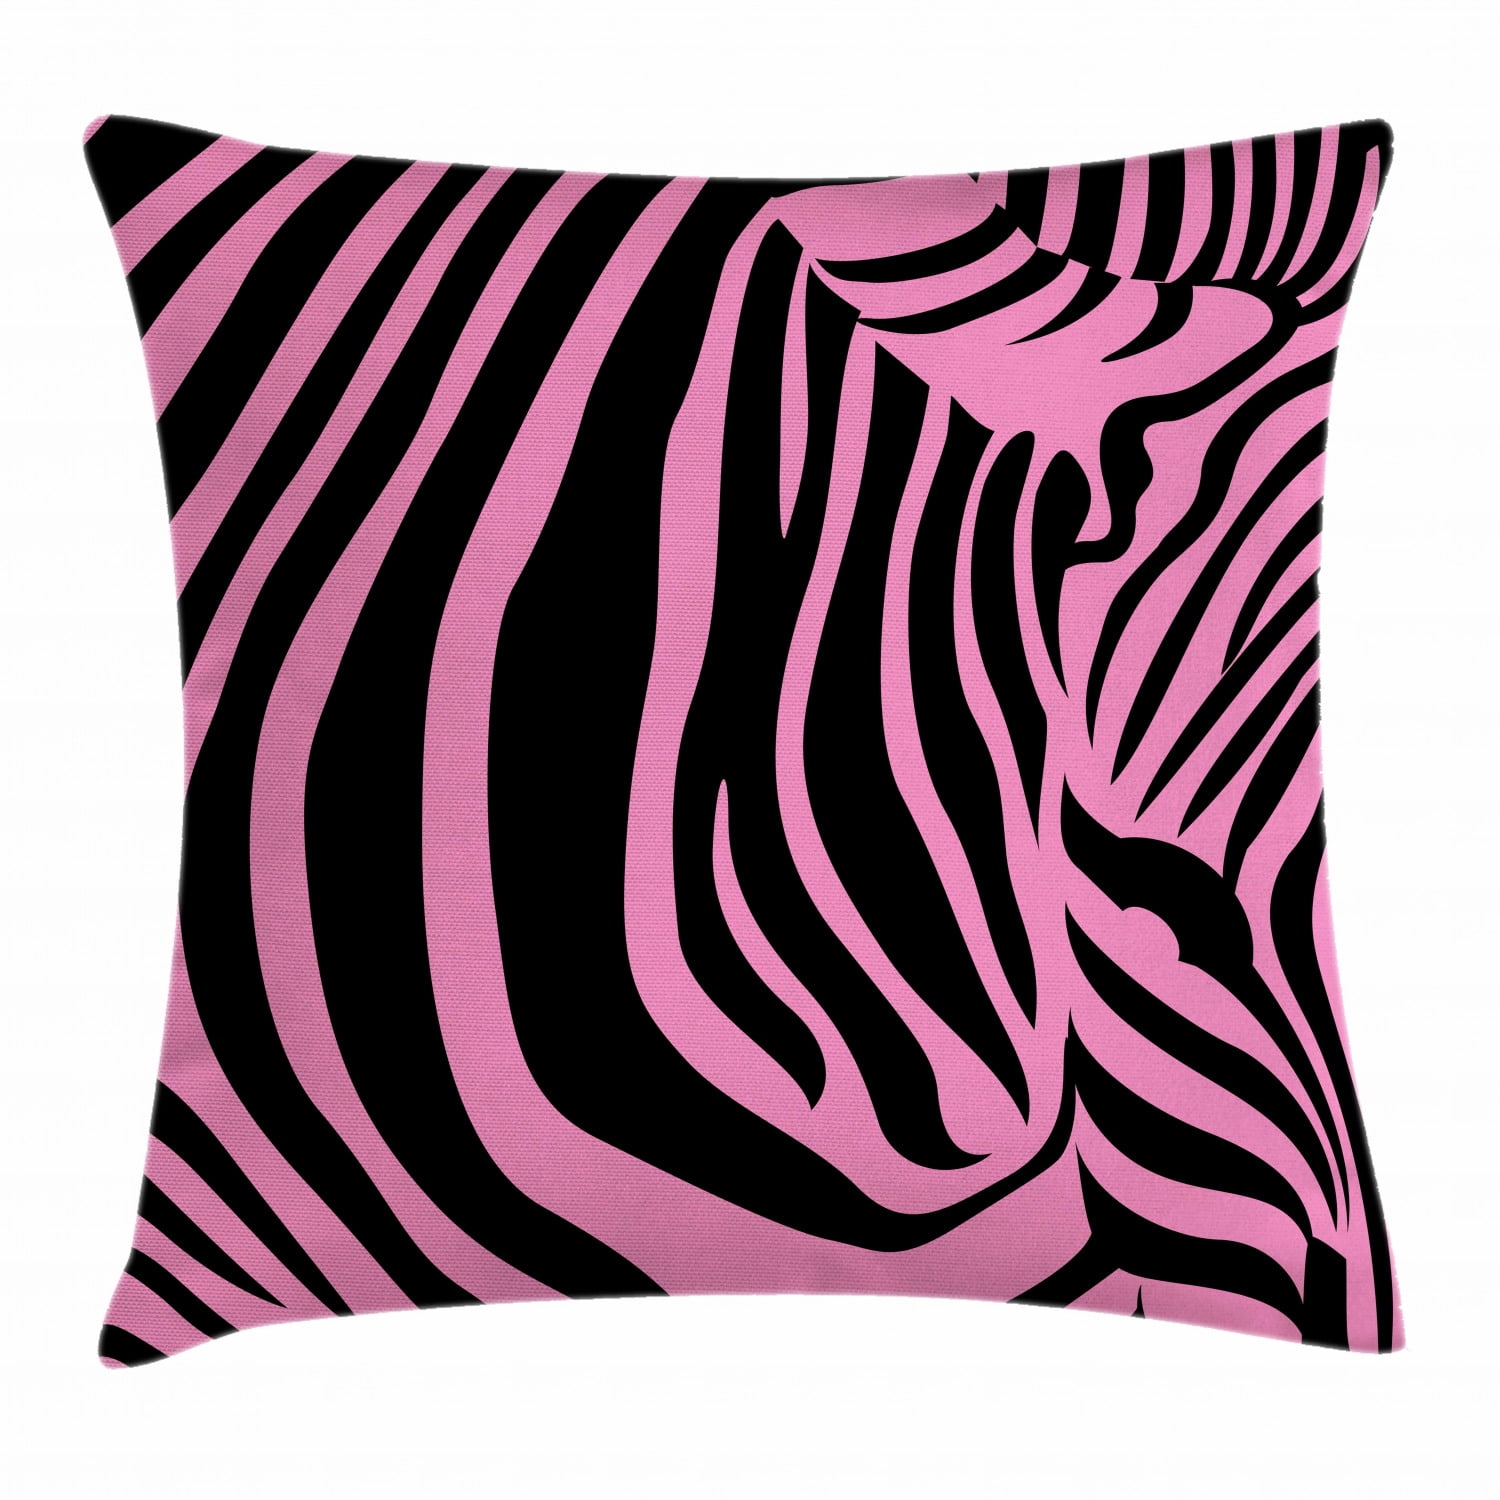 Reversible Soft Pillow Cover Case Hot Pink and White Zebra Design Zippered 